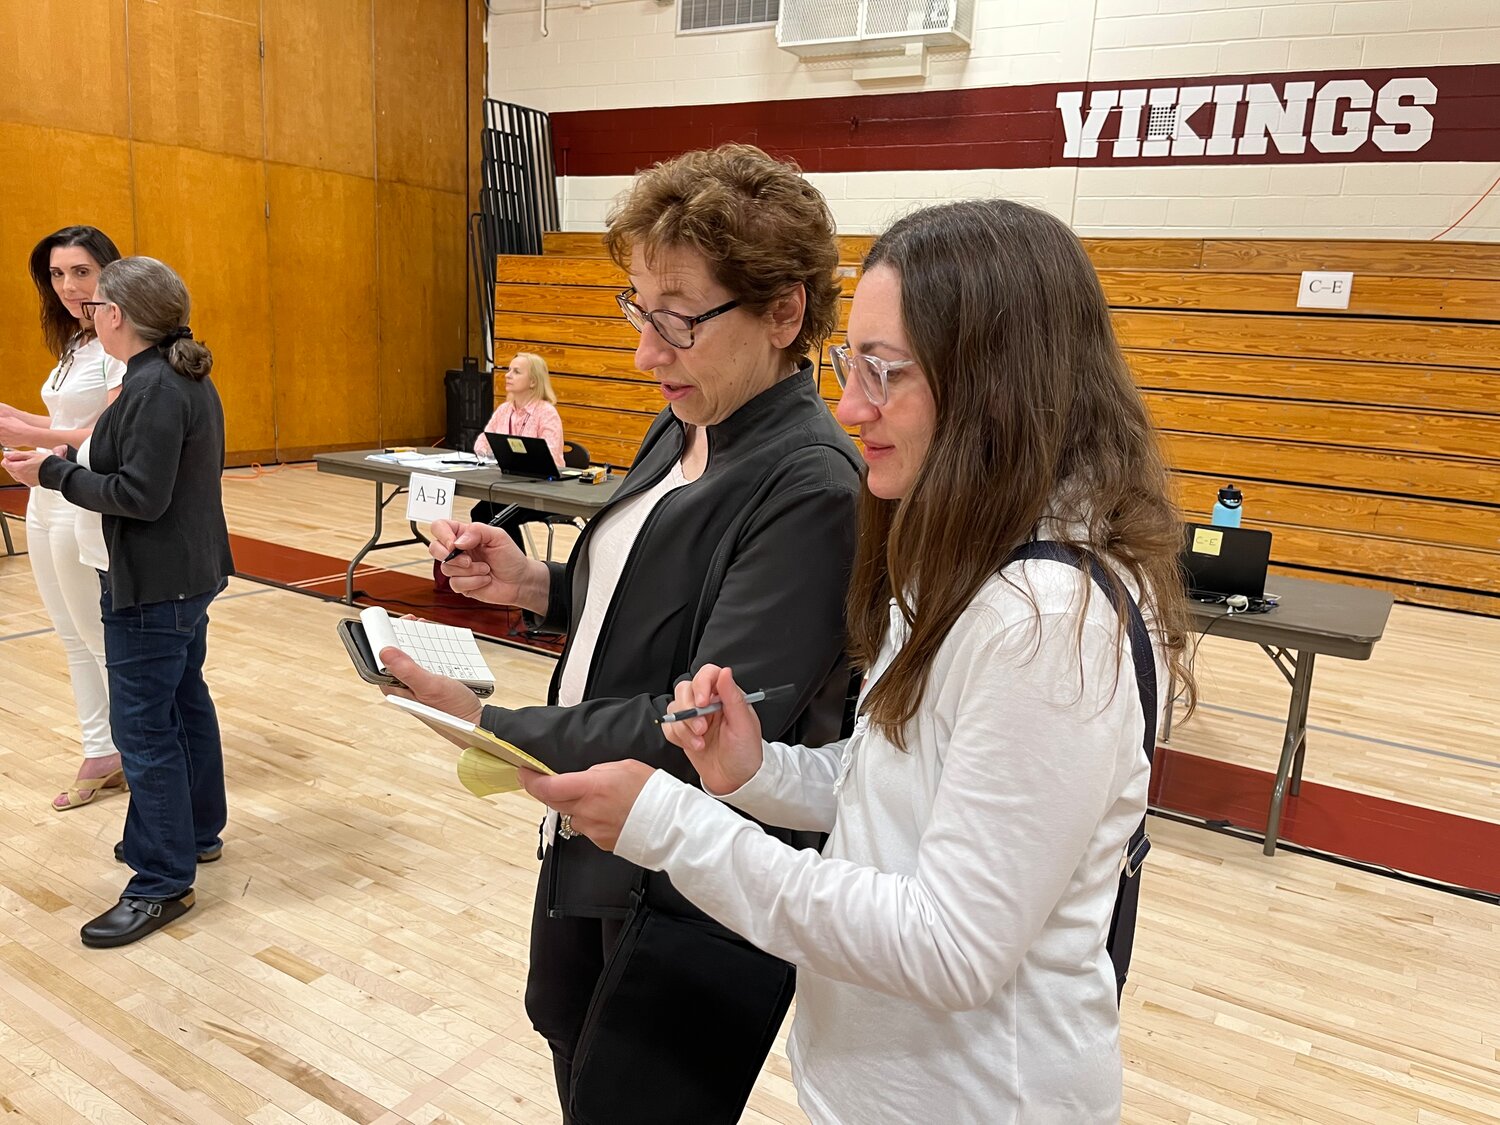 Board of Education trustees Maria Mosca, left, and Lisa Colacioppo anxiously counted the votes during the final tally.